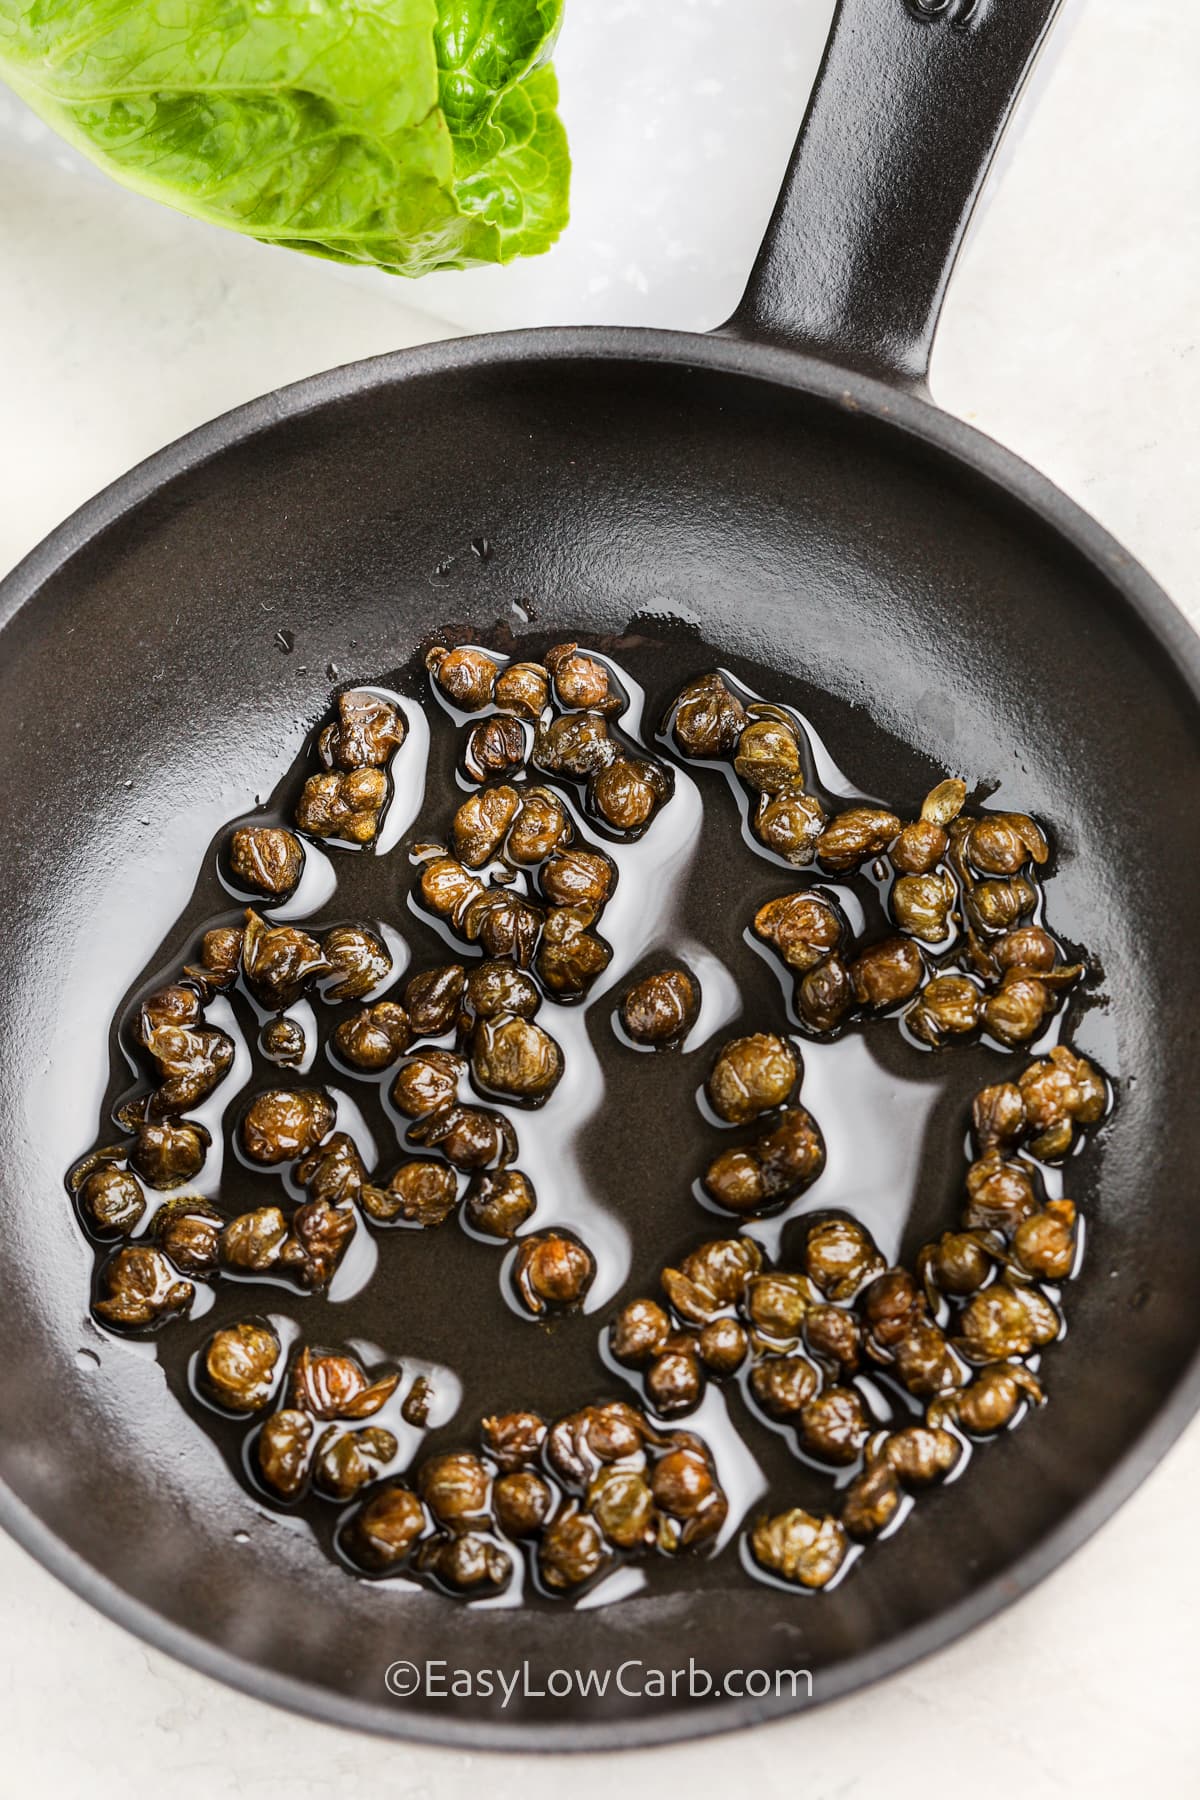 oil and capers in a pan to make Fried Capers